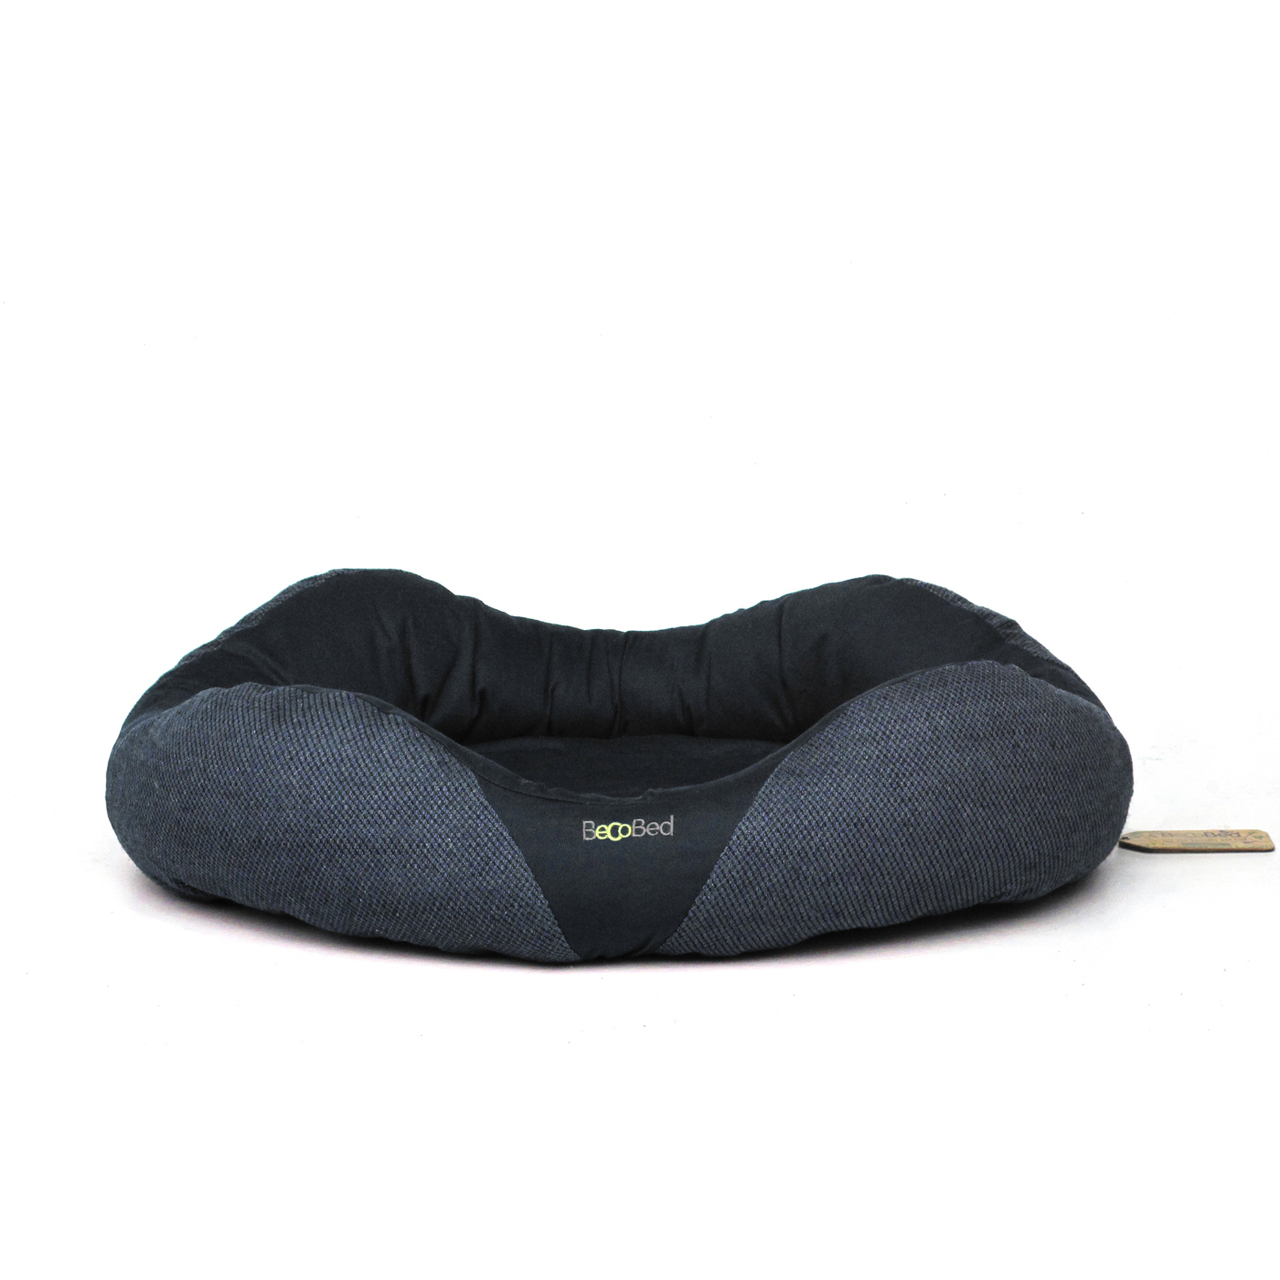 An image of Beco Pets Eco Bed Piccadilly Blue Medium